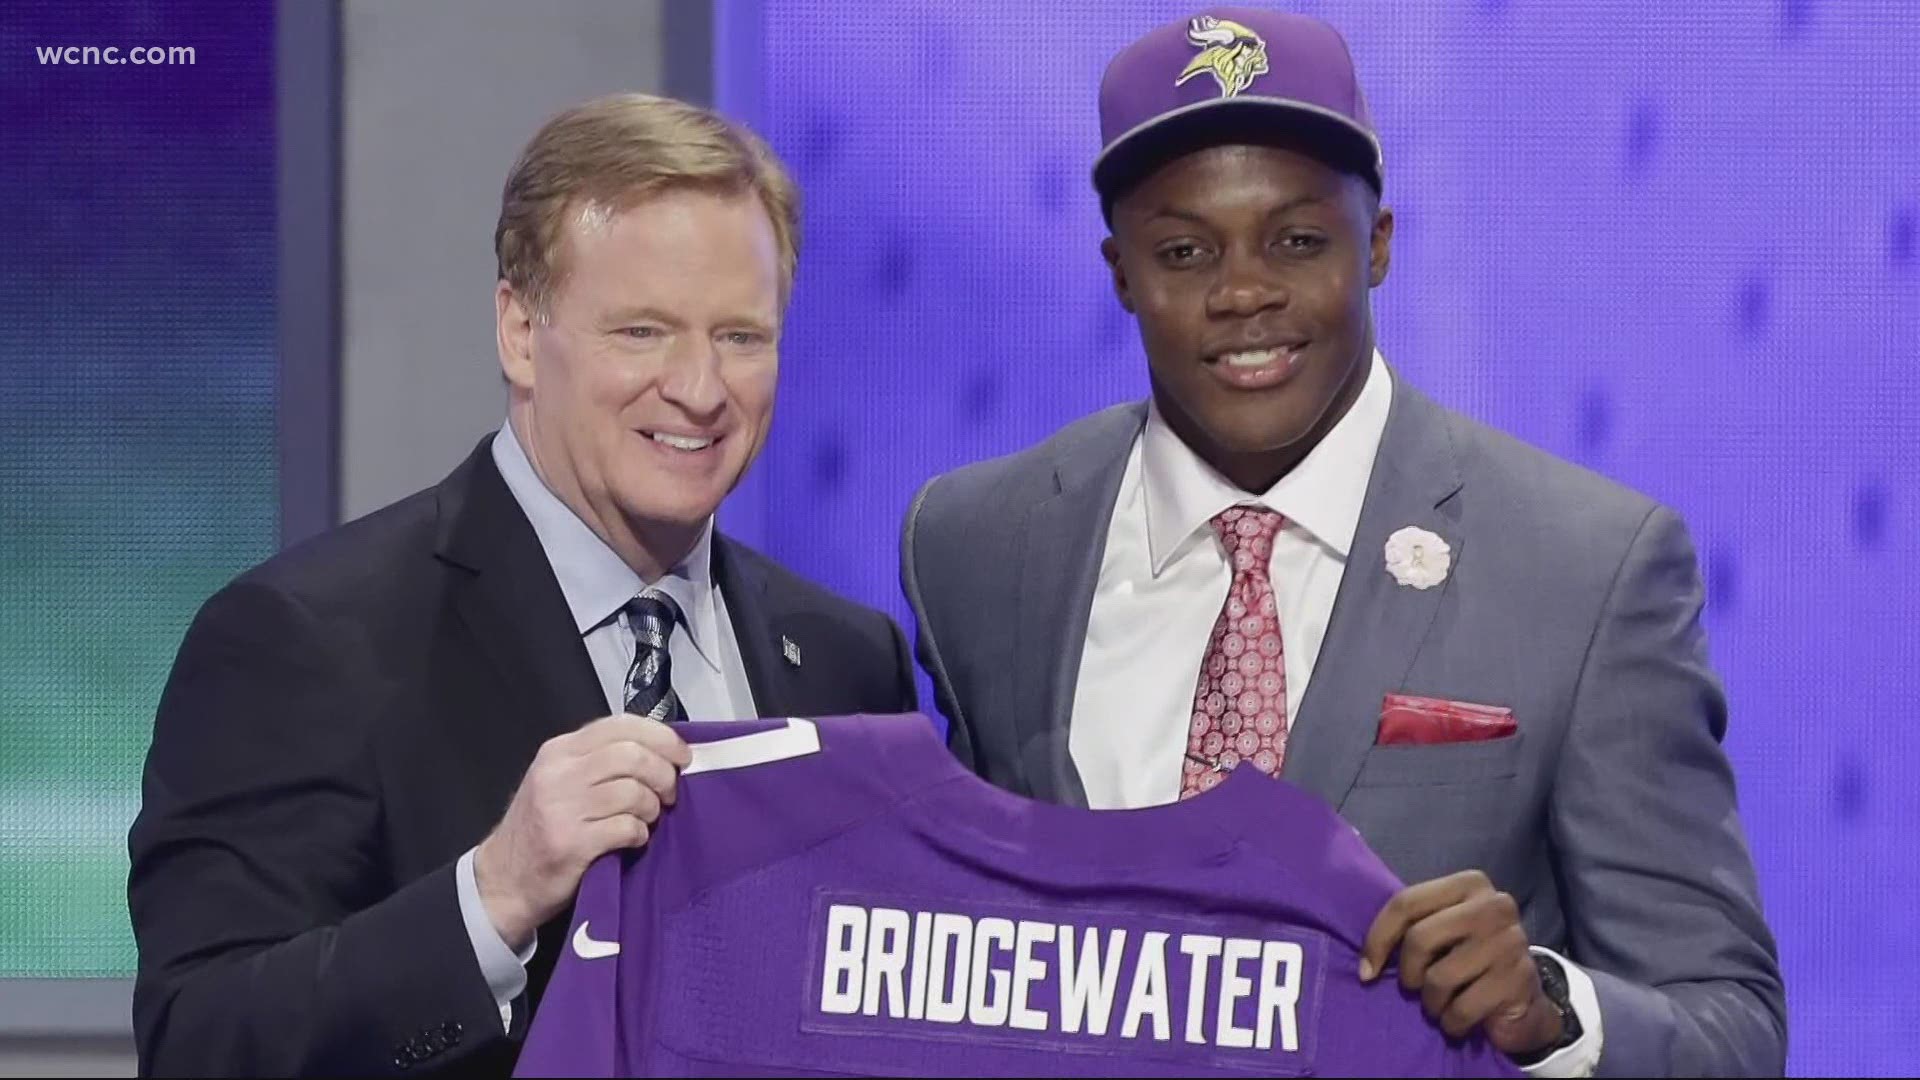 Bridgewater had two promising seasons with the Vikings, before a freak injury in a 2016 practice that was later described as potentially life-threatening.